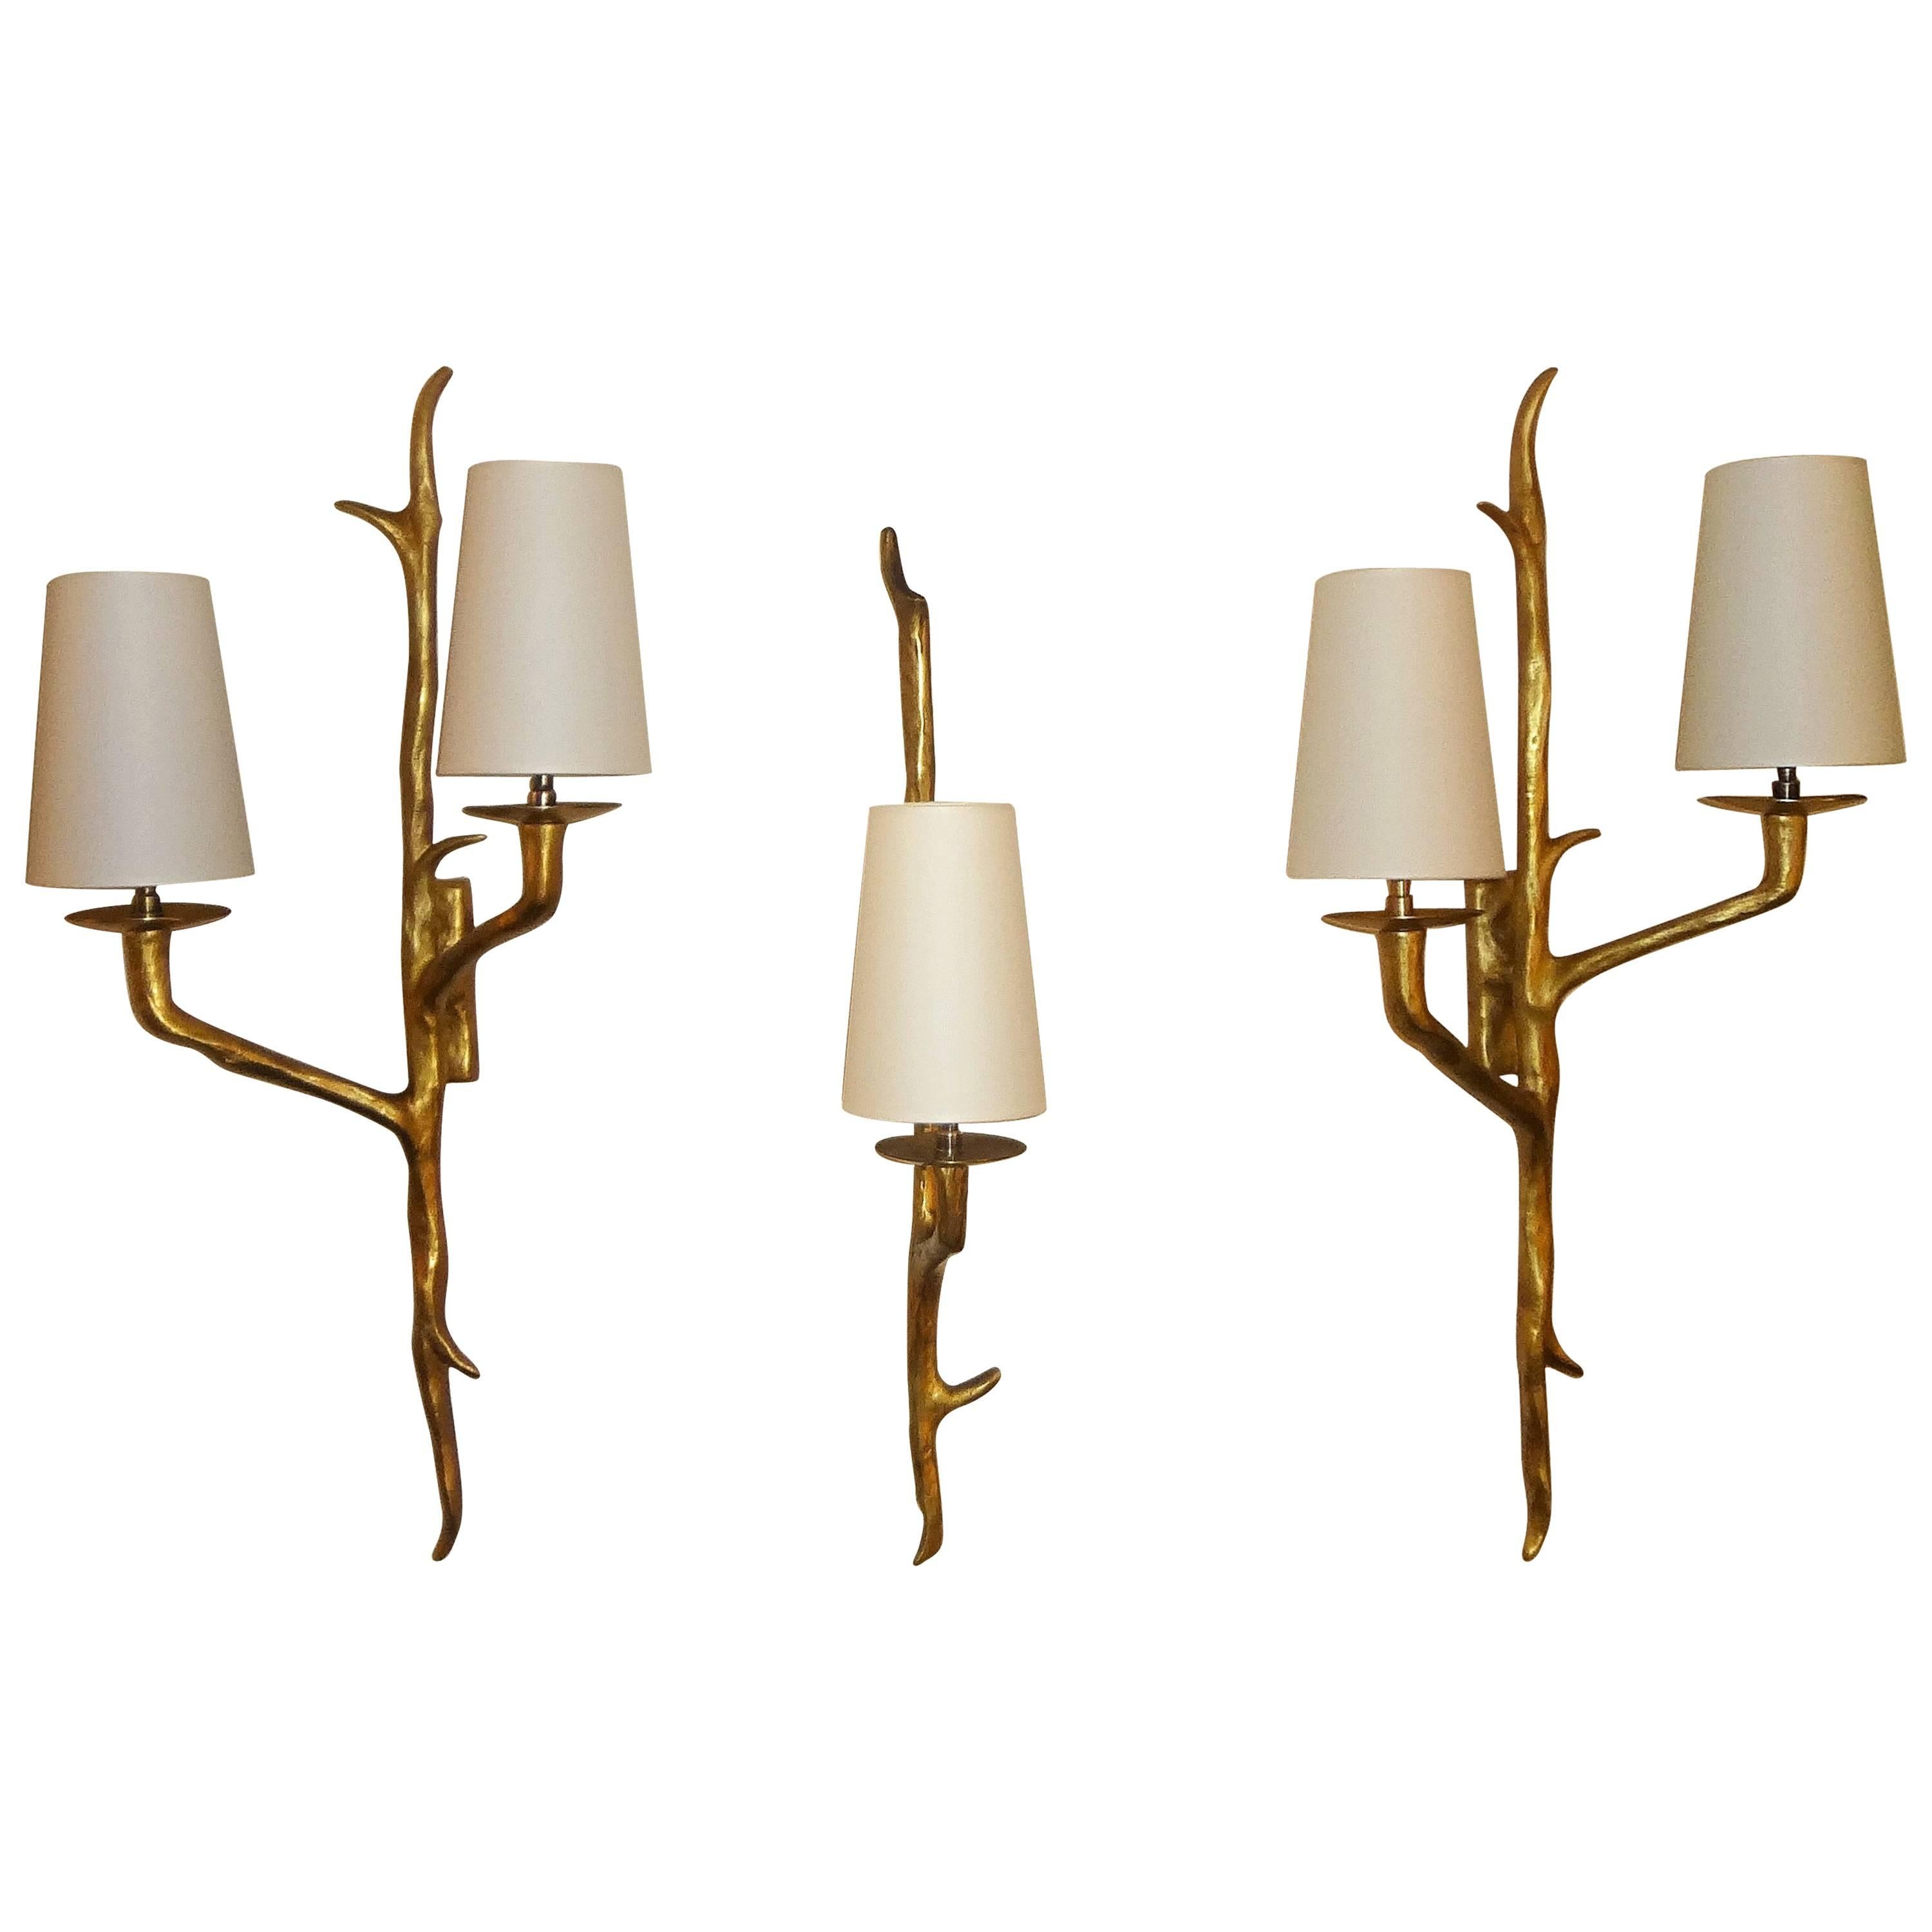 Set of three Wall Sconces by Maison Arlus, 1950s For Sale